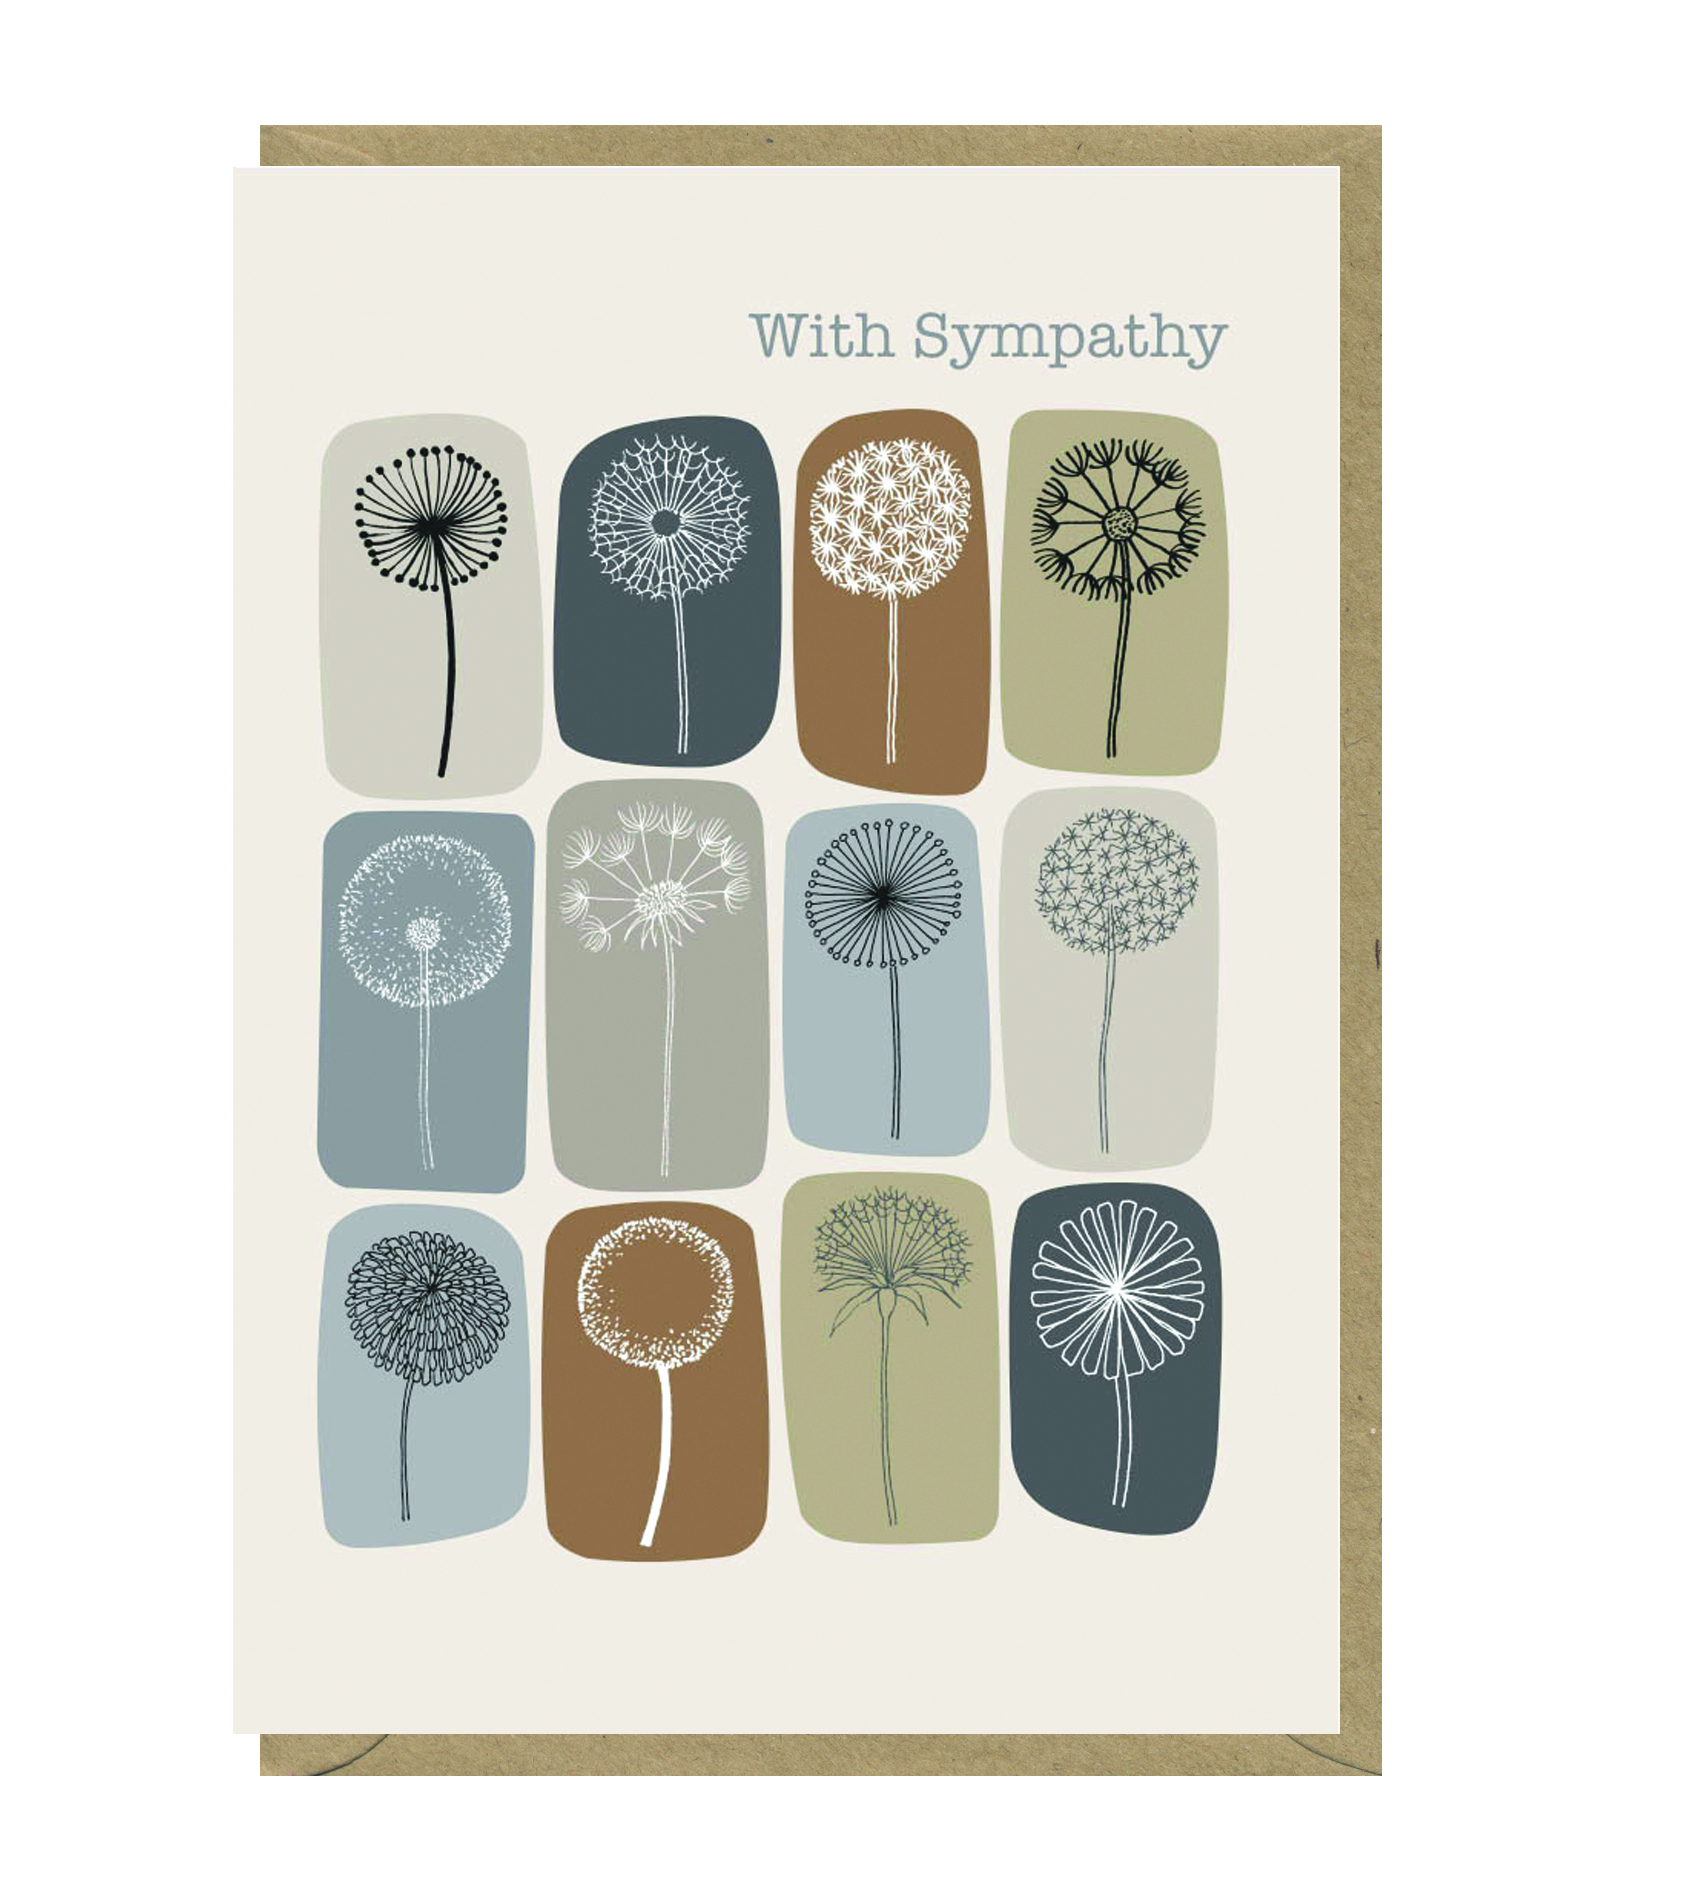 With Sympathy card by Eloise Renouf for Earlybird designs